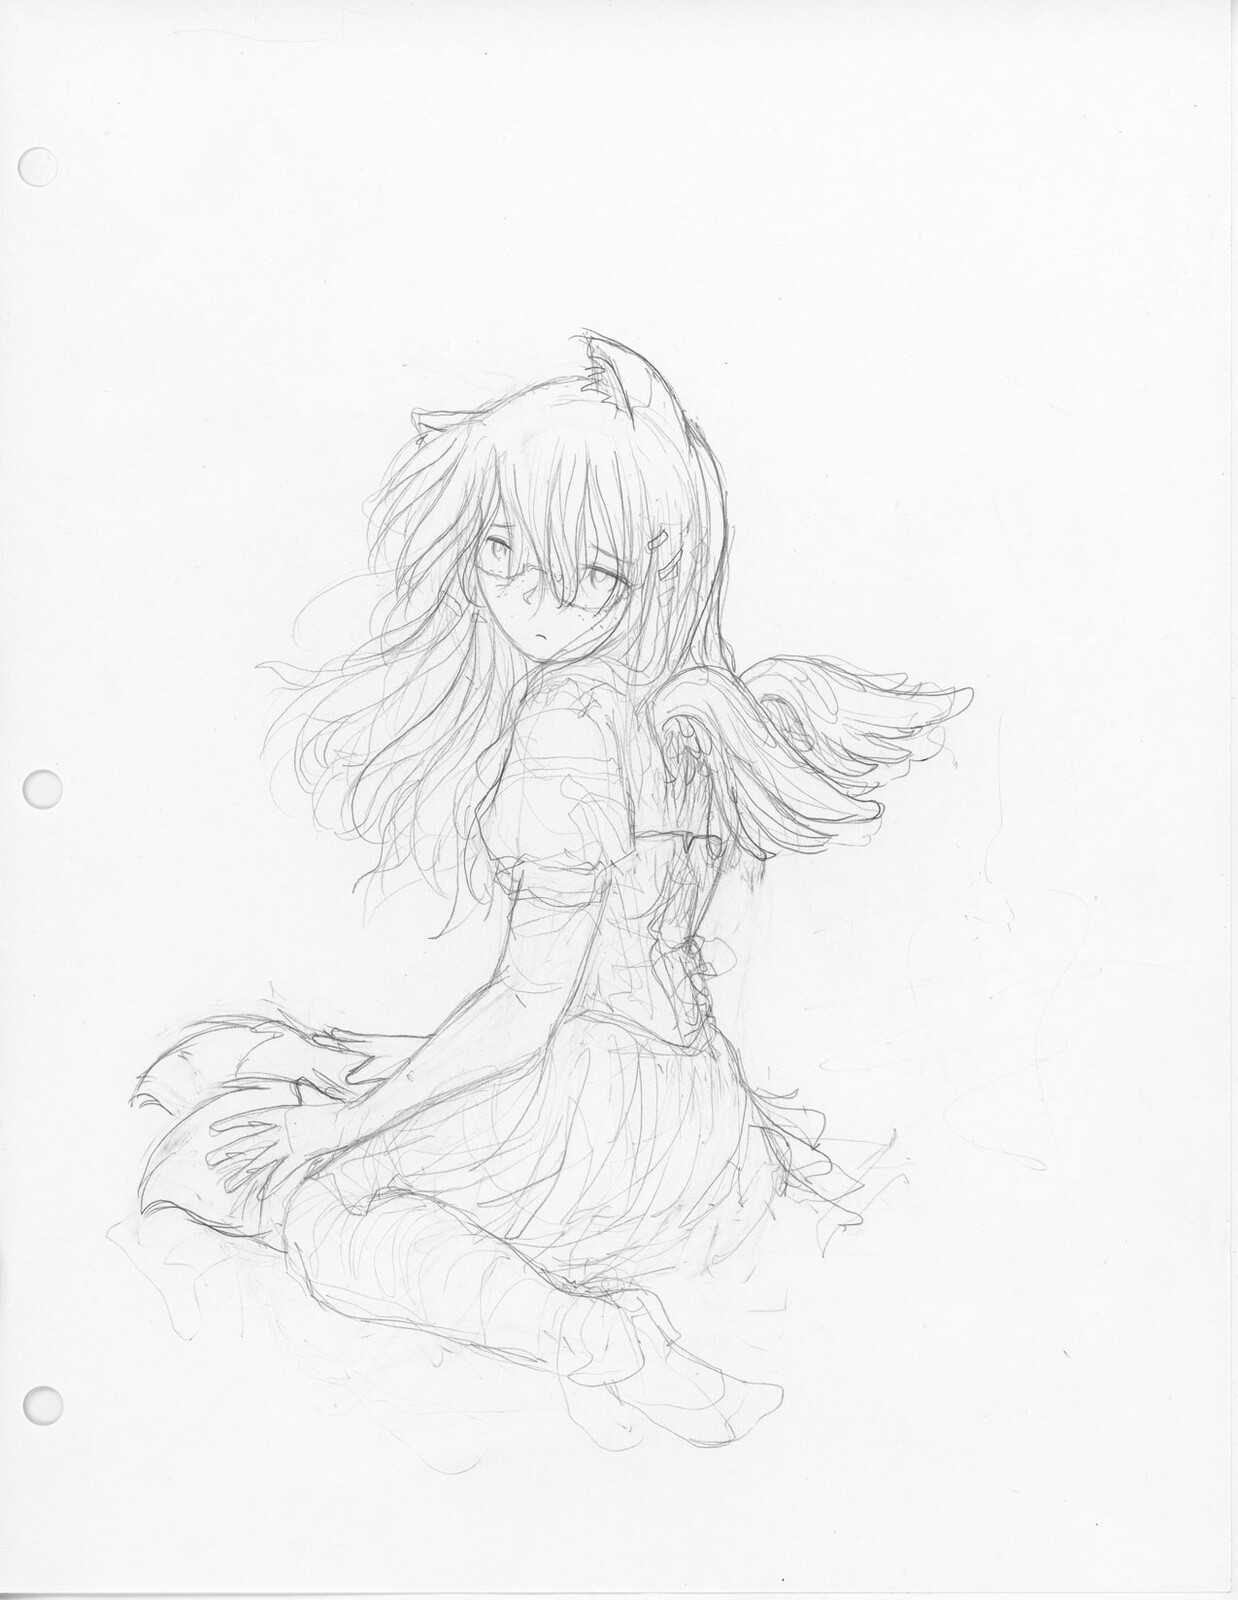 Initial rough sketch, Pencil (HB) on HP Bright White Inkjet Paper